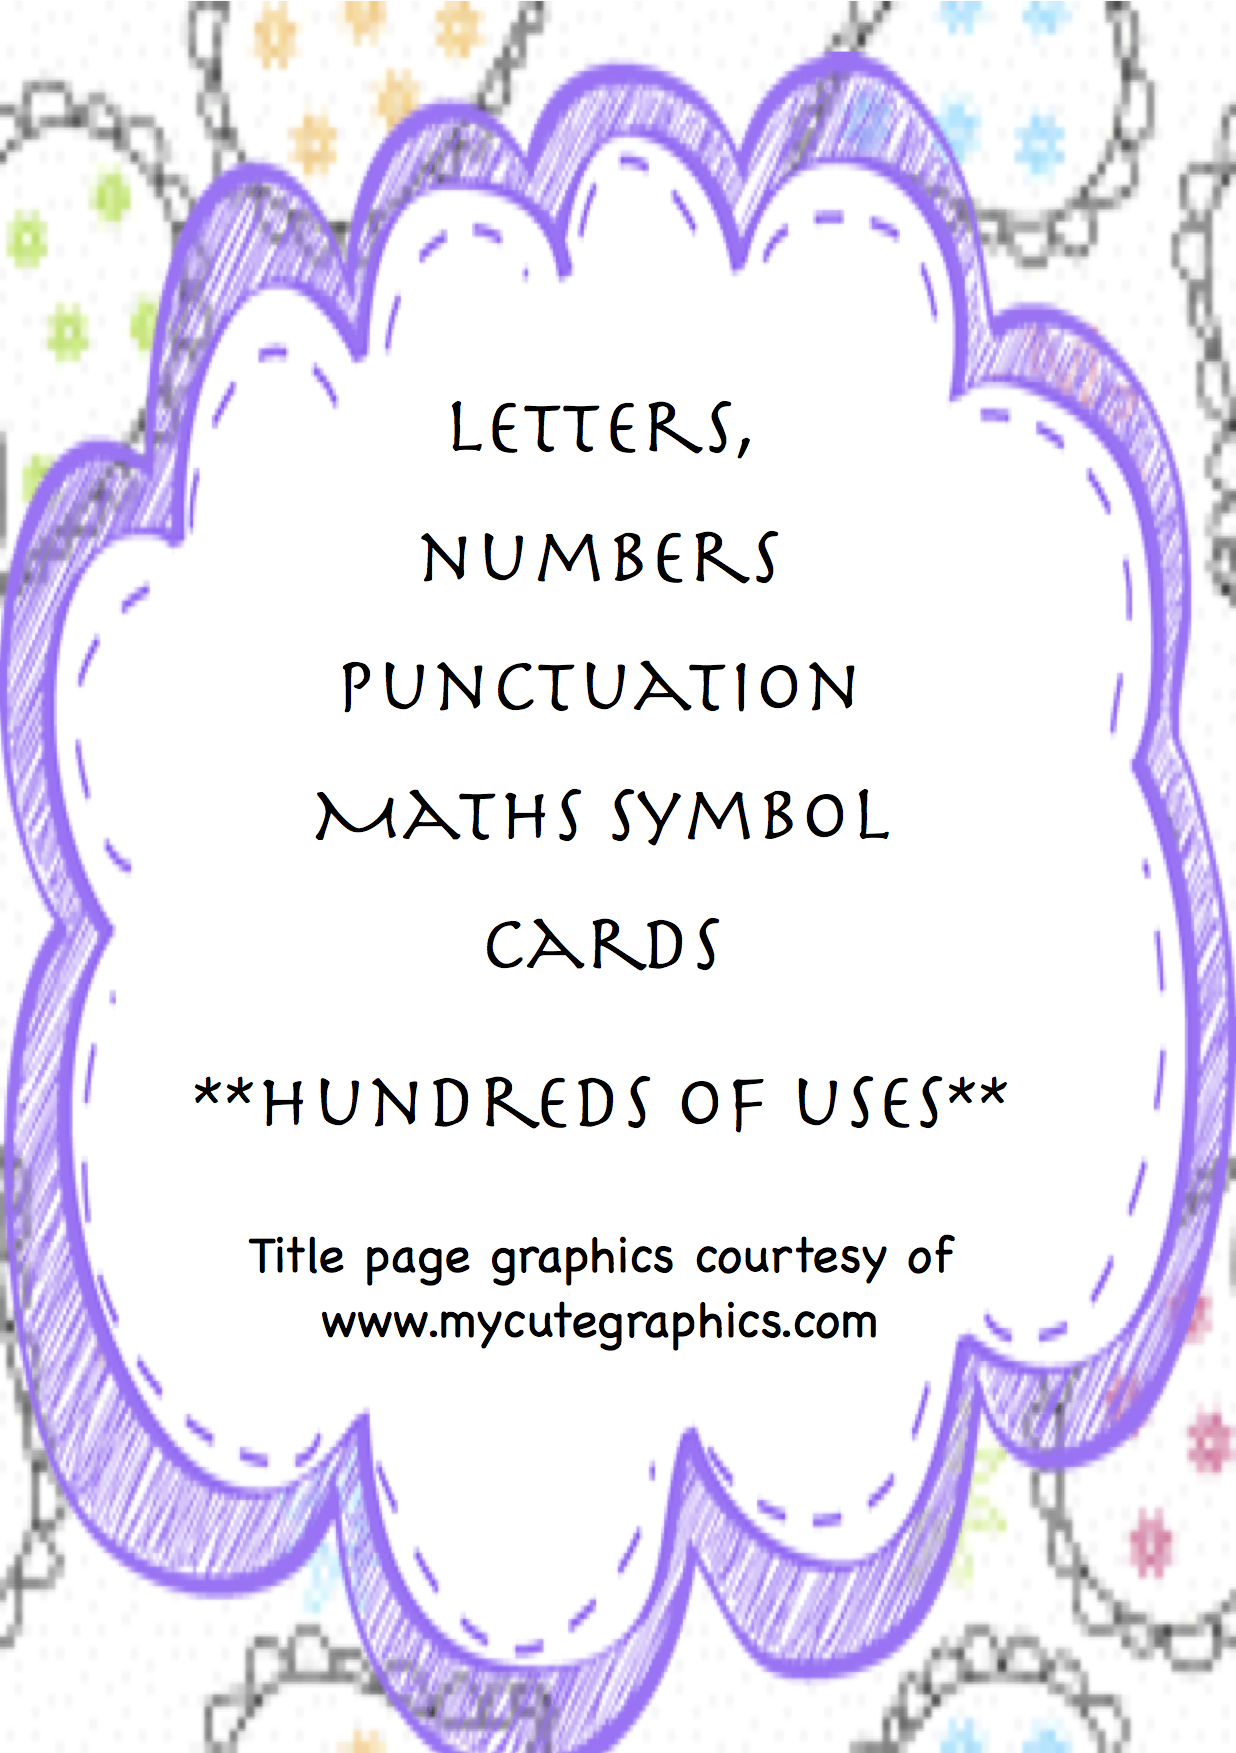 Letters/Numbers/Punctuation cards